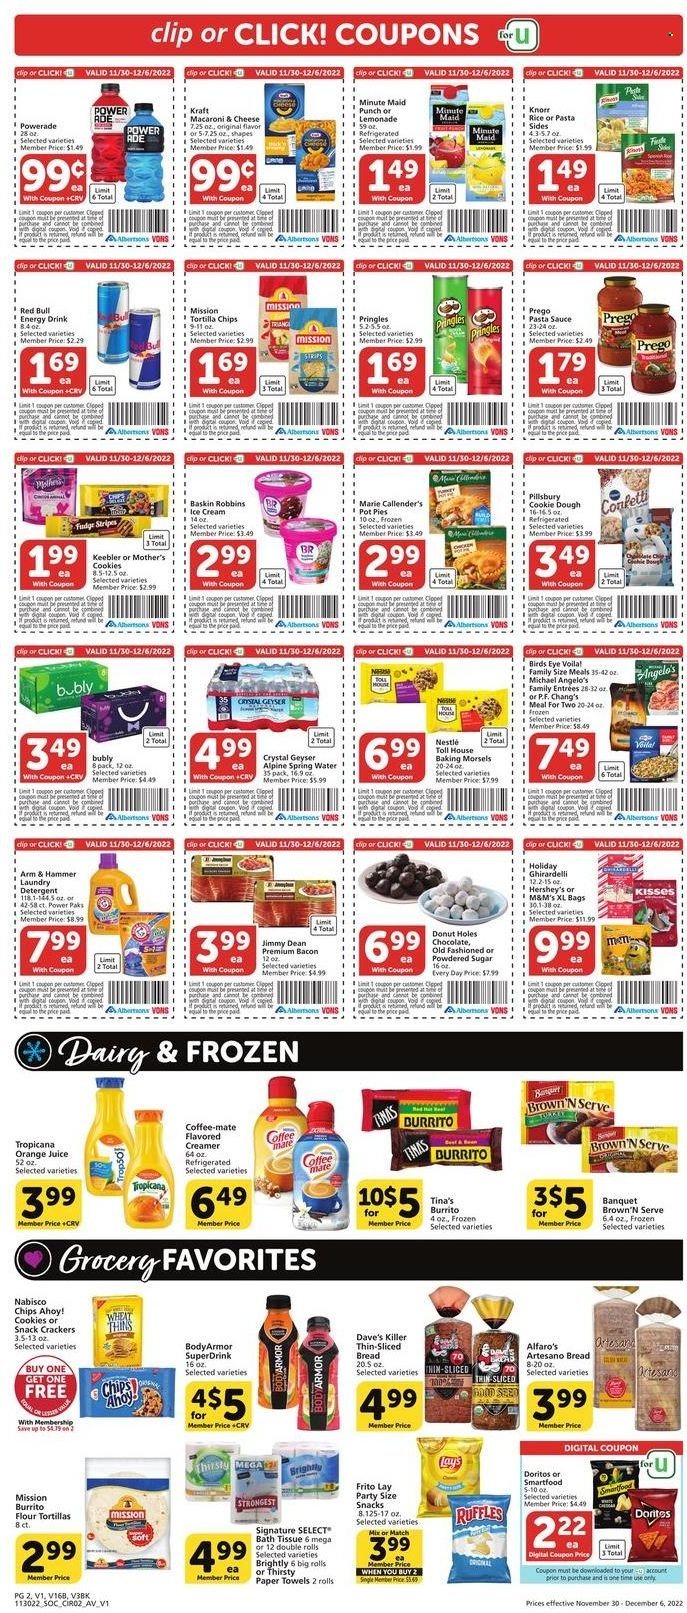 thumbnail - Vons Flyer - 11/30/2022 - 12/06/2022 - Sales products - bread, flour tortillas, donut holes, pot pie, macaroni & cheese, pasta sauce, Knorr, sauce, Pillsbury, burrito, Marie Callender's, Kraft®, Jimmy Dean, bacon, Coffee-Mate, creamer, dip, ice cream, Hershey's, strips, cookie dough, cookies, fudge, Nestlé, Mars, M&M's, crackers, Chips Ahoy!, Ghirardelli, Keebler, Doritos, tortilla chips, Pringles, Lay’s, Smartfood, Thins, Ruffles, ARM & HAMMER, sugar, icing sugar, lemonade, Powerade, orange juice, juice, energy drink, Red Bull, fruit punch, spring water, bath tissue, kitchen towels, paper towels, detergent, laundry detergent, cutter. Page 2.